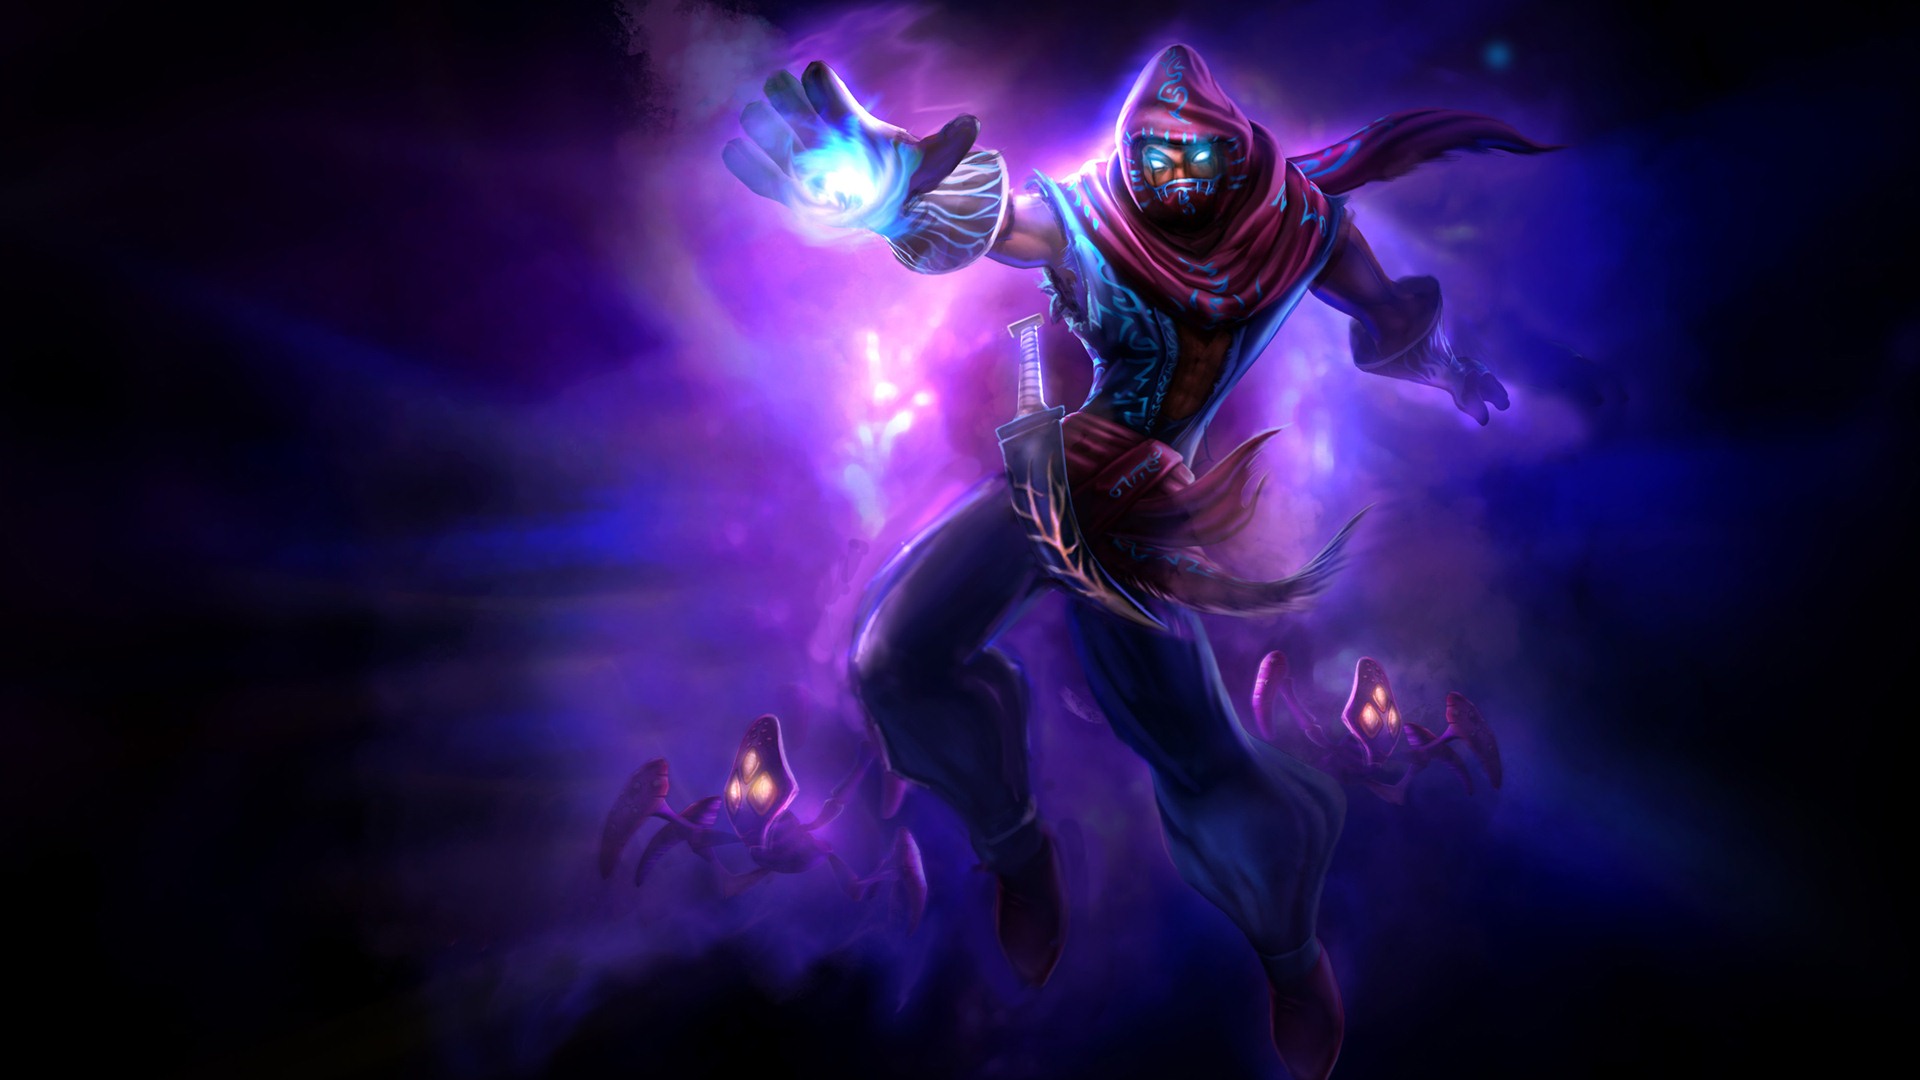 League of Legends game HD wallpapers #13 - 1920x1080